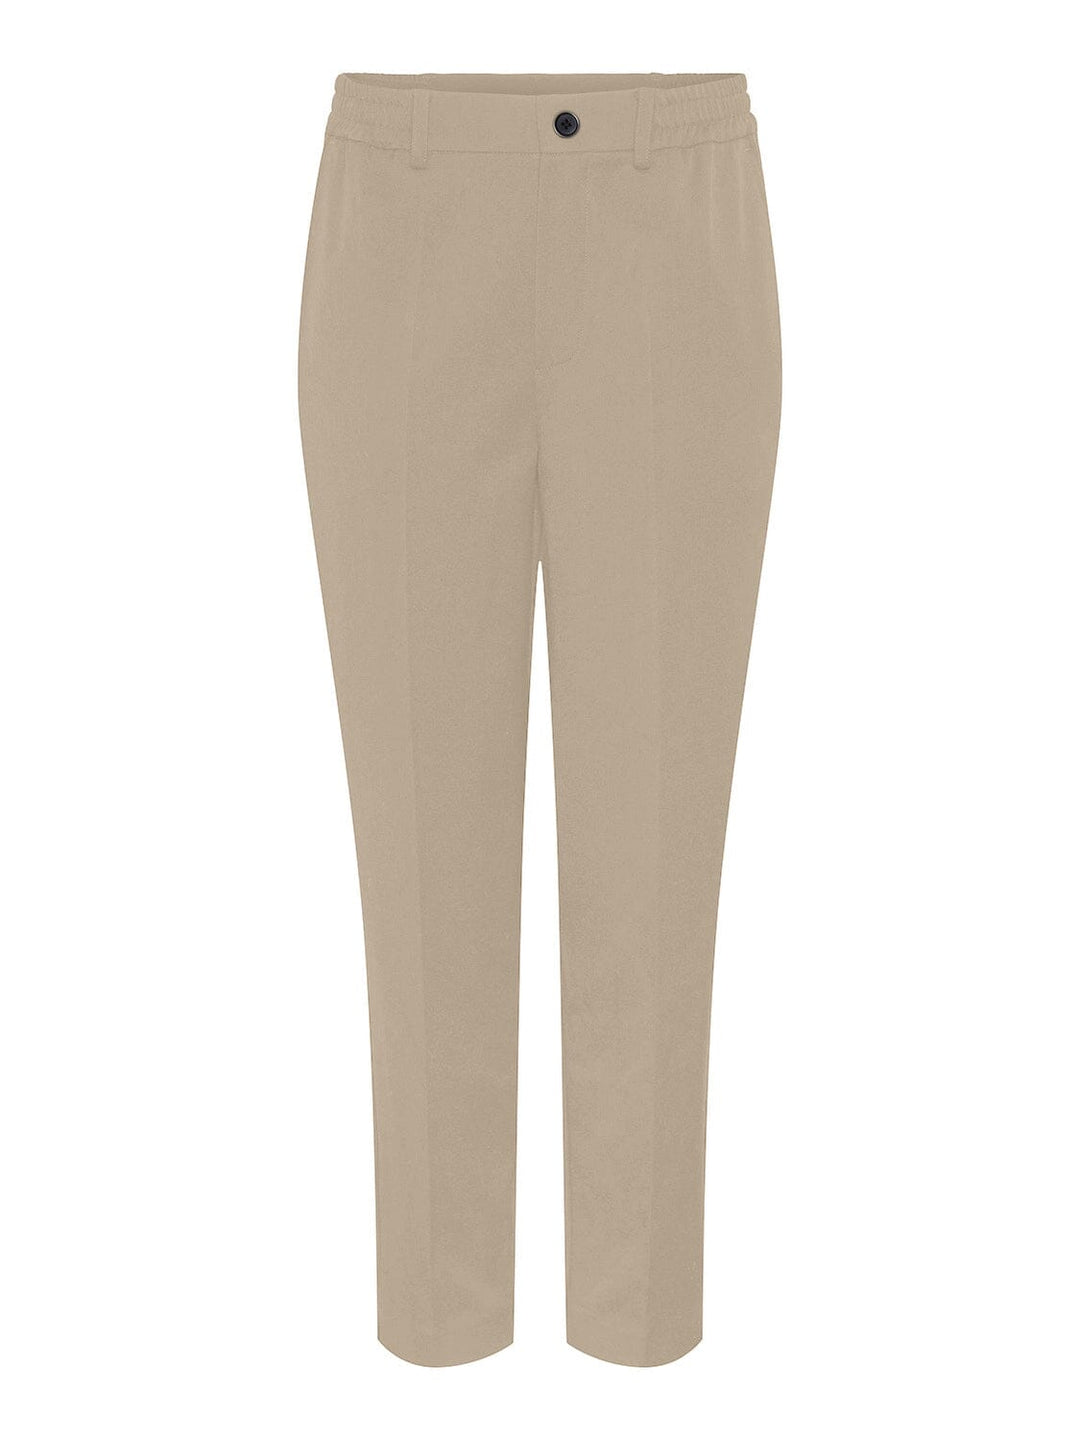 Pieces, Pccamil Hw Ankle Pant, White Pepper